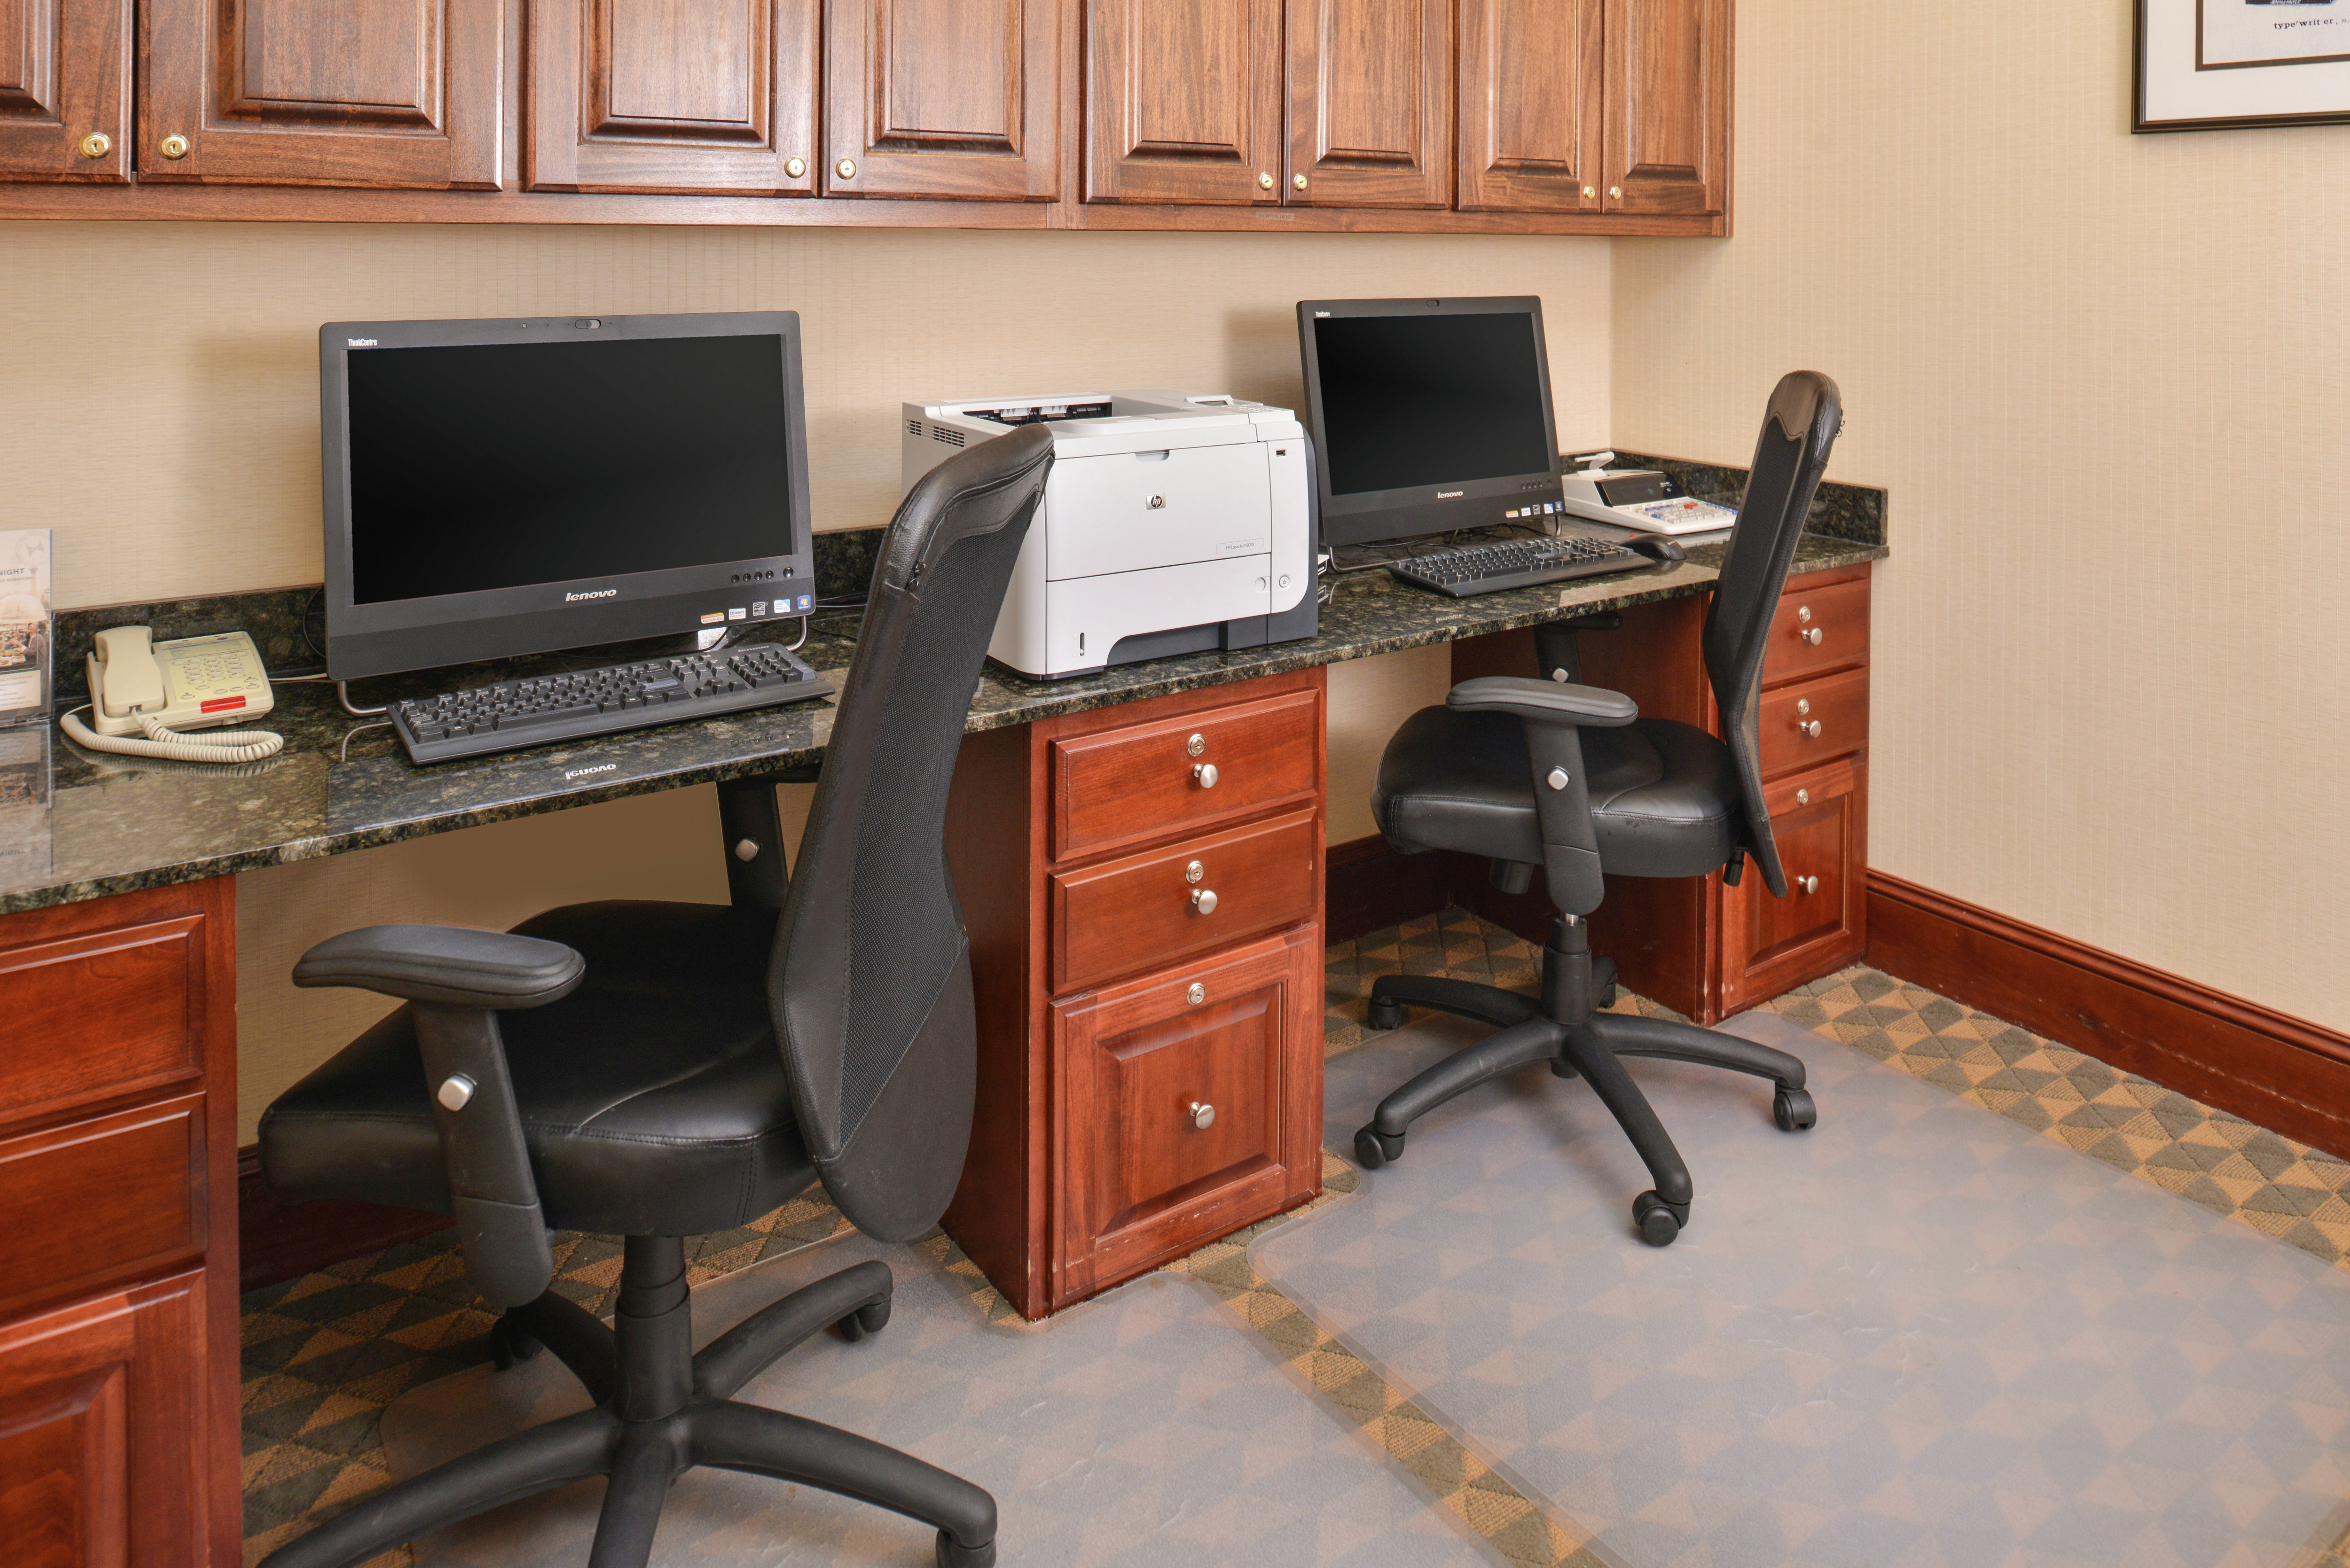 Business Center With Storage Cabinets, Two Computer Workstations, Ergonomic Chairs, Phone, and Printer